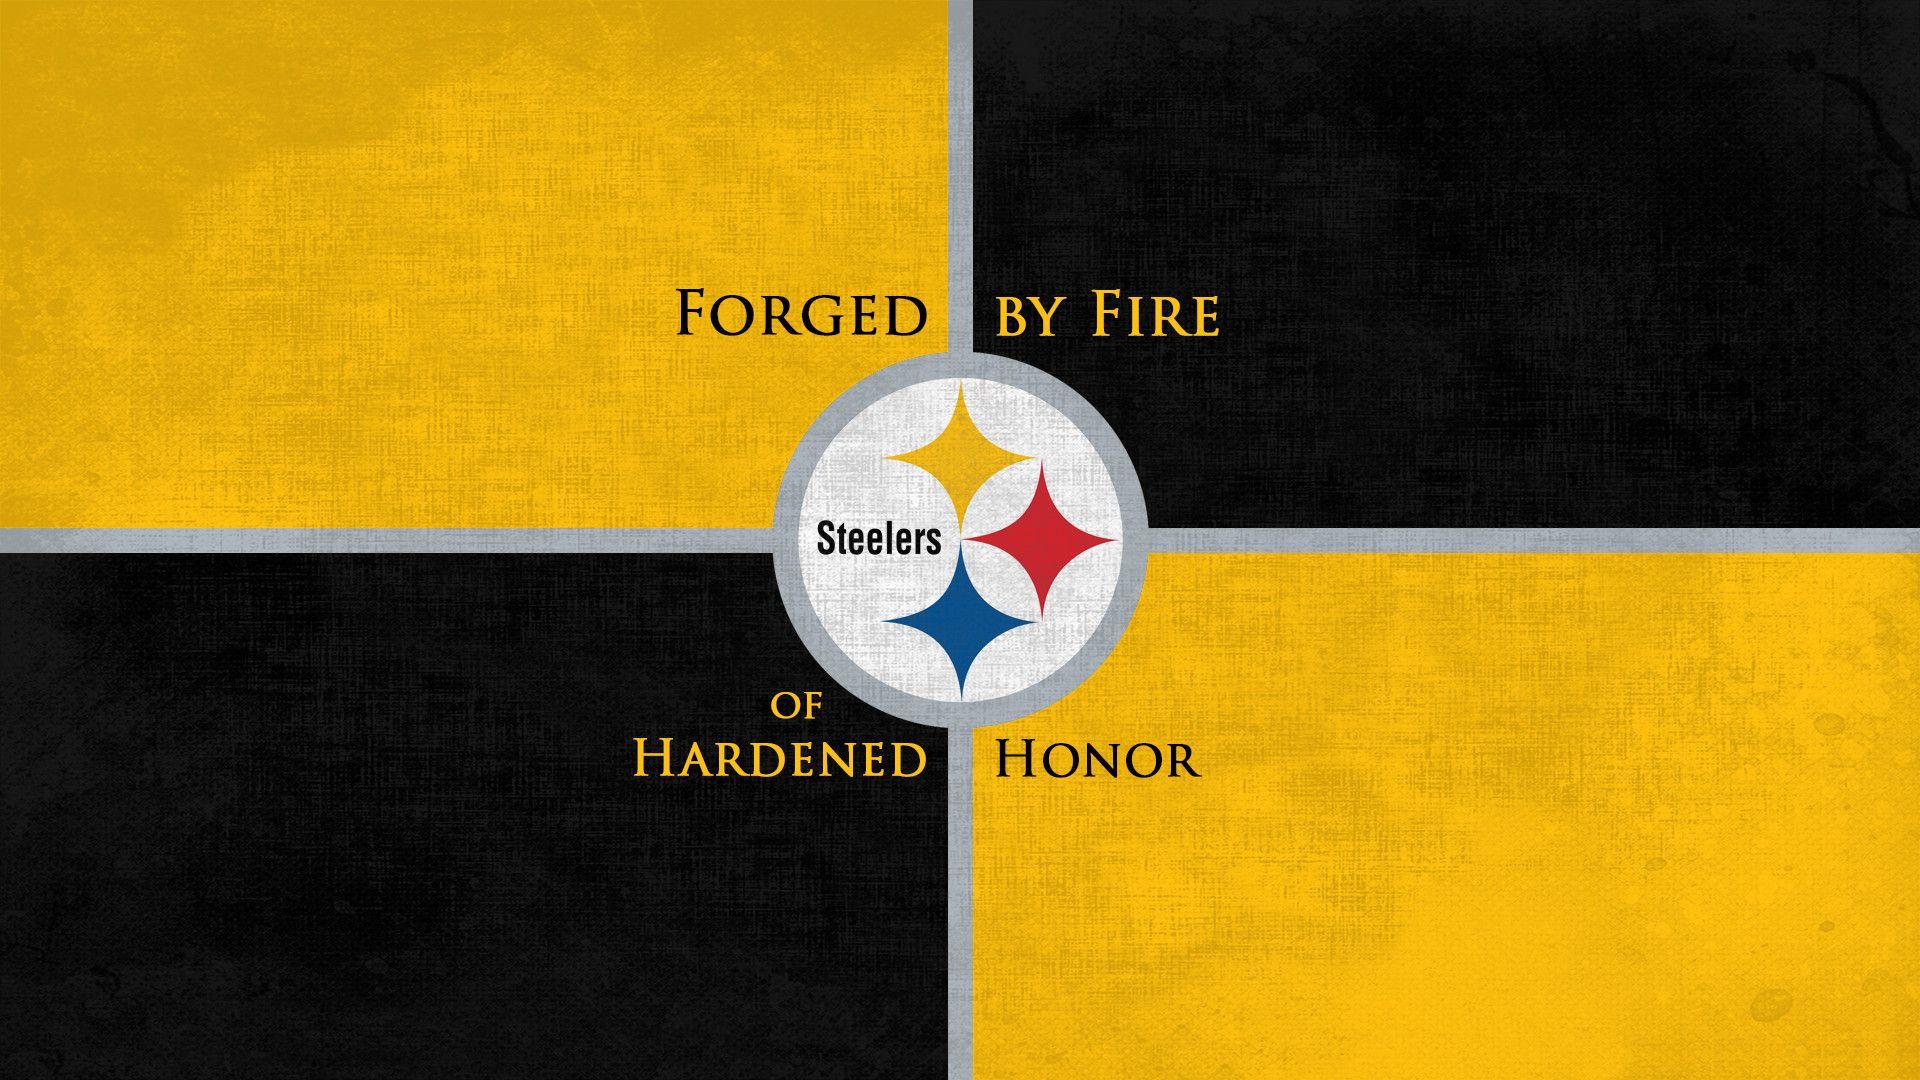 Download Pittsburgh Steelers Football Wallpaper 5074 1920x1080 px